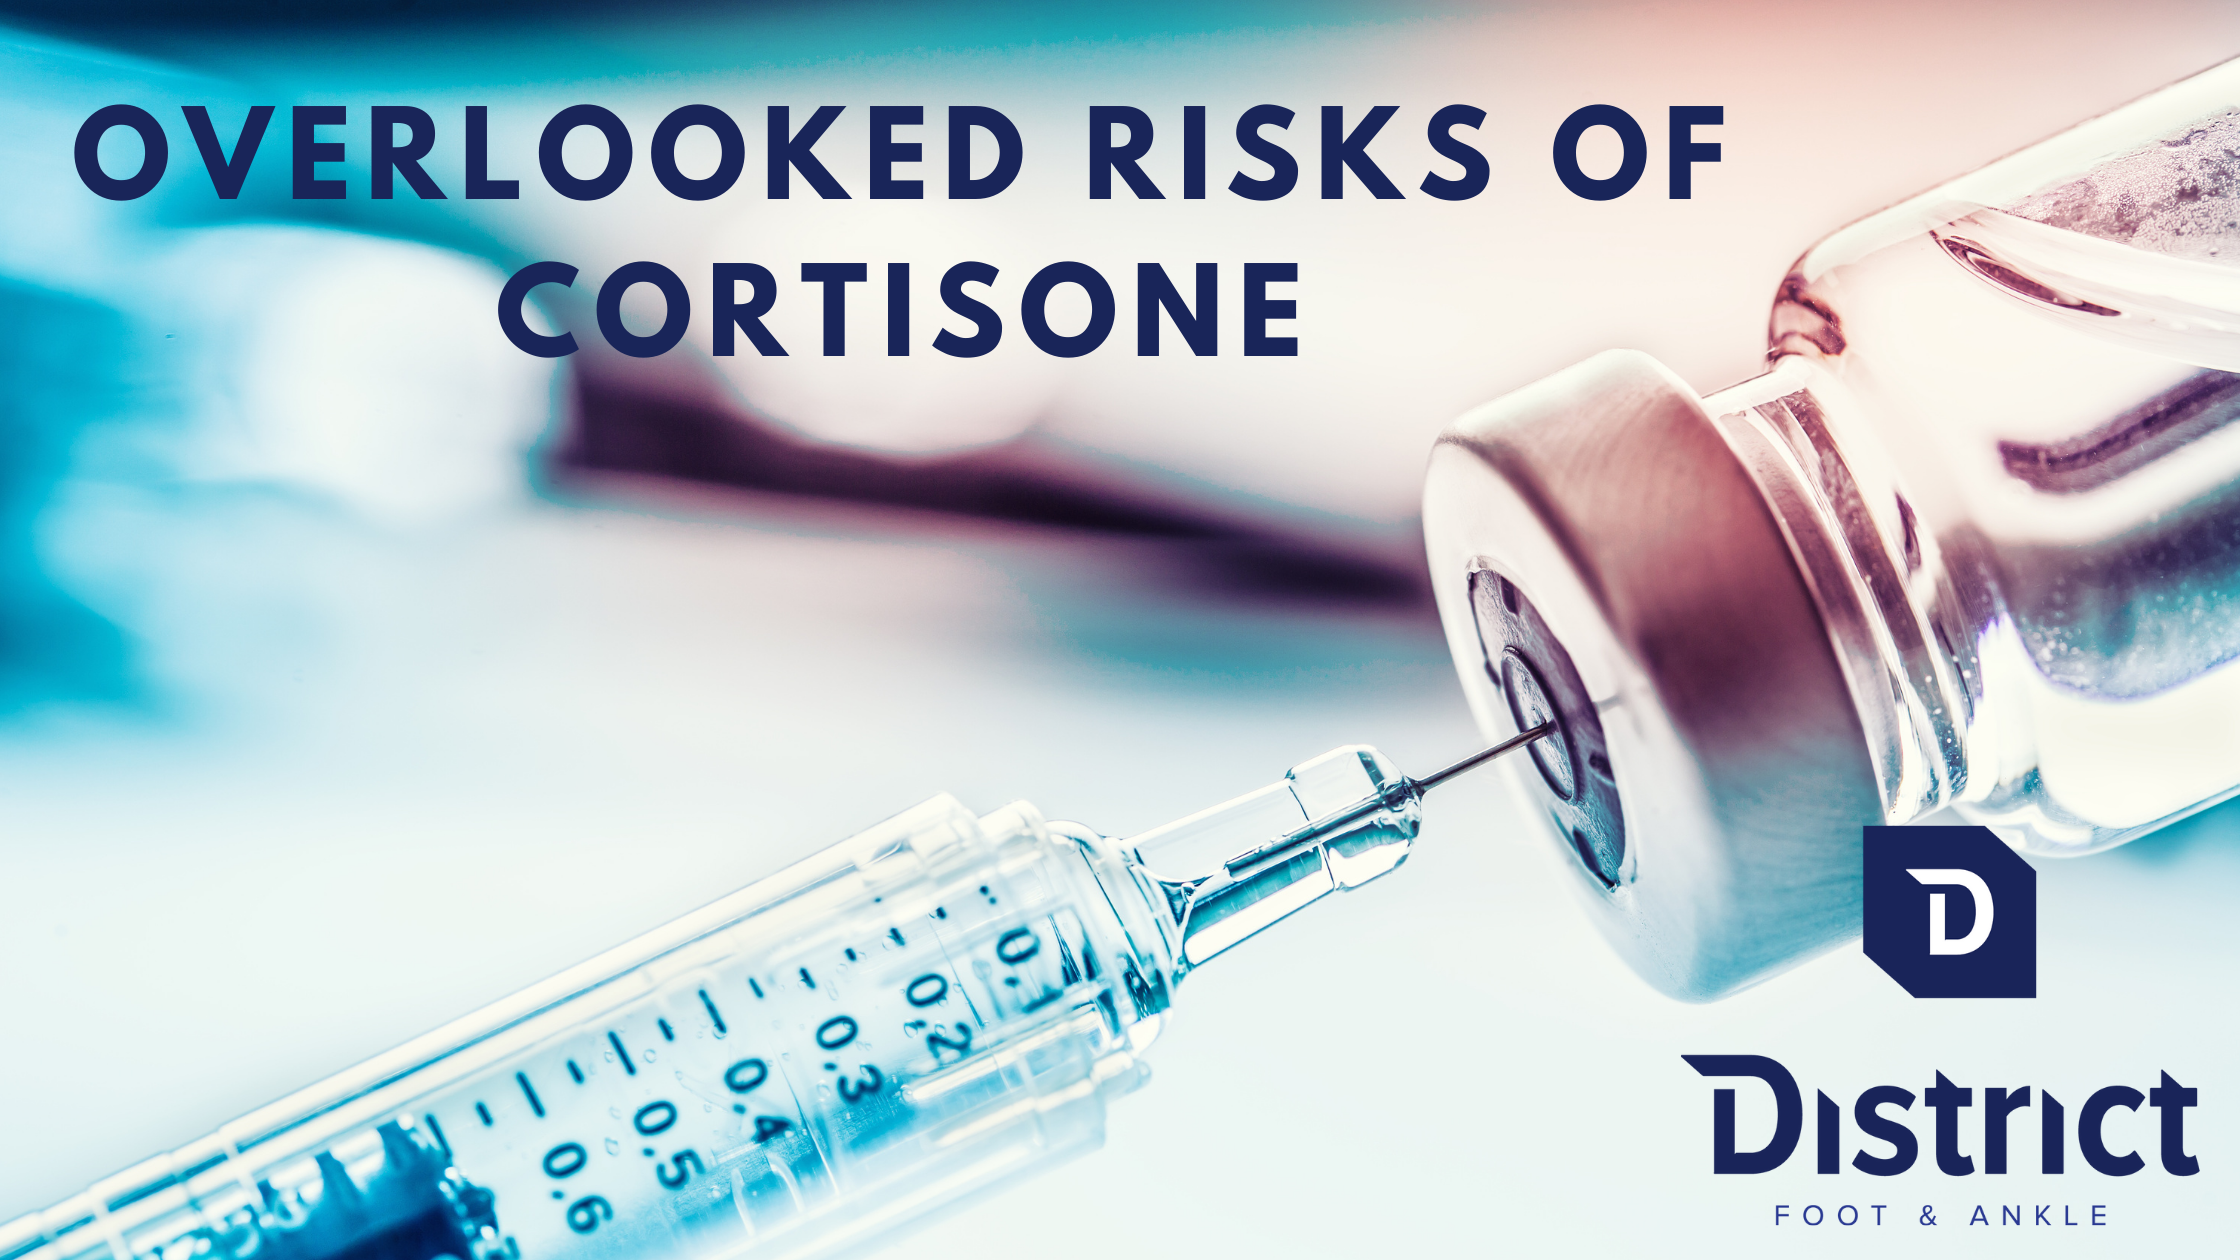 Risks of cortisone in the foot and ankle